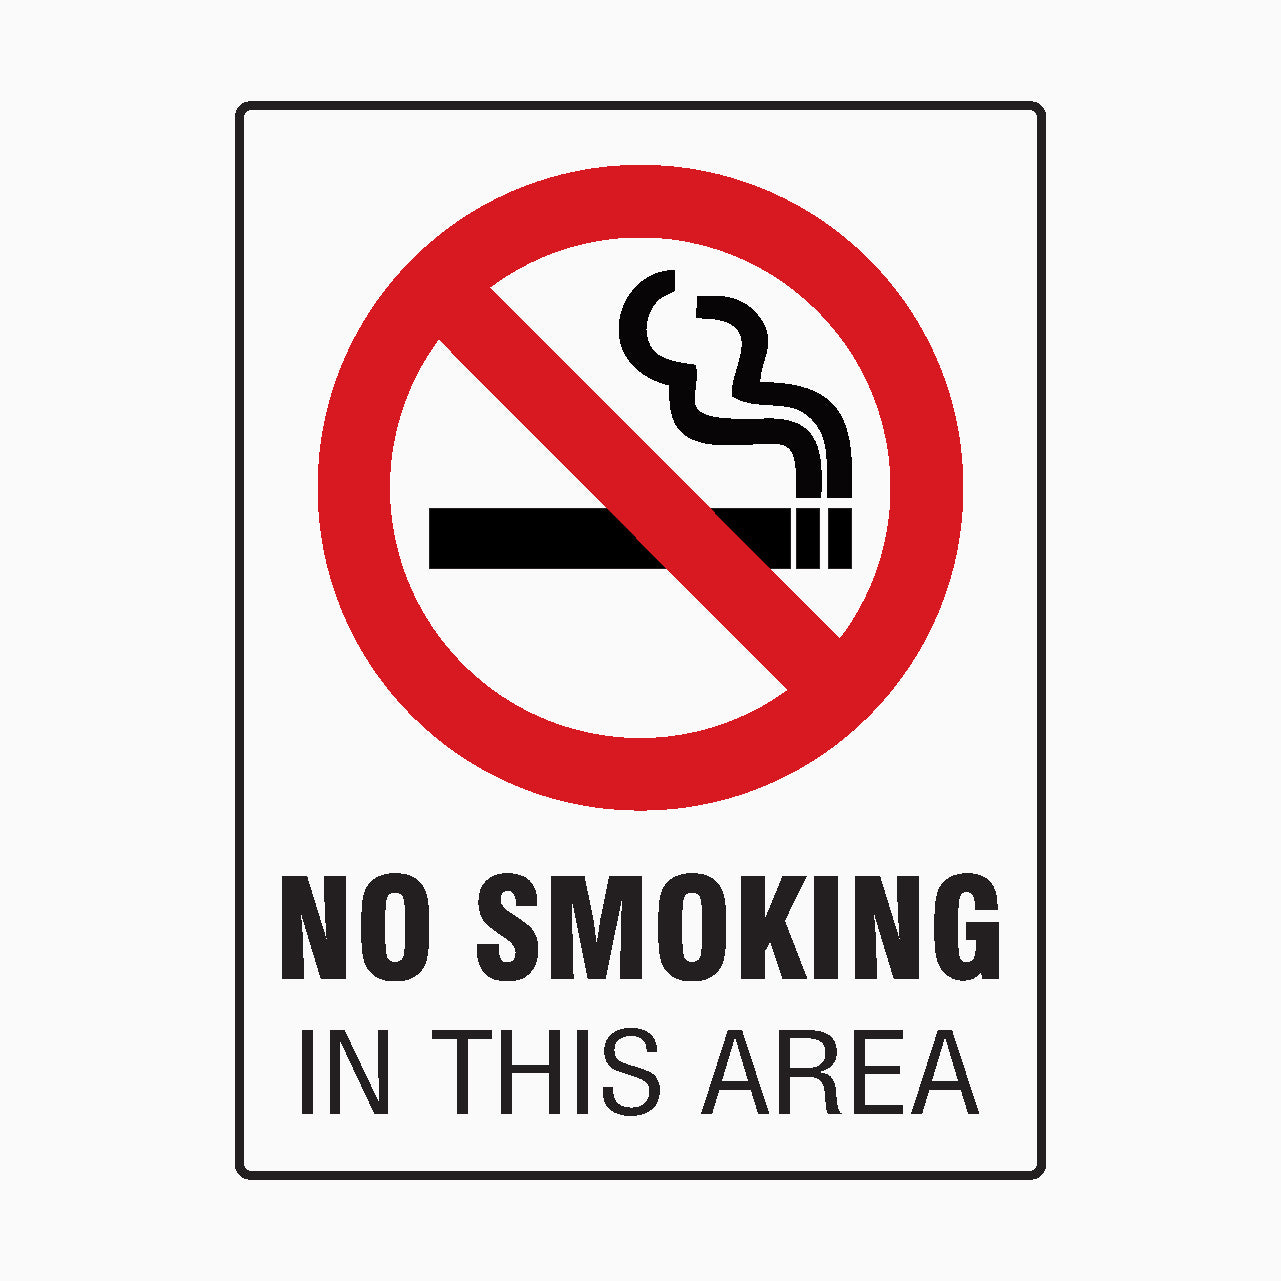 NO SMOKING IN THIS AREA SIGN - Prohibition Signs